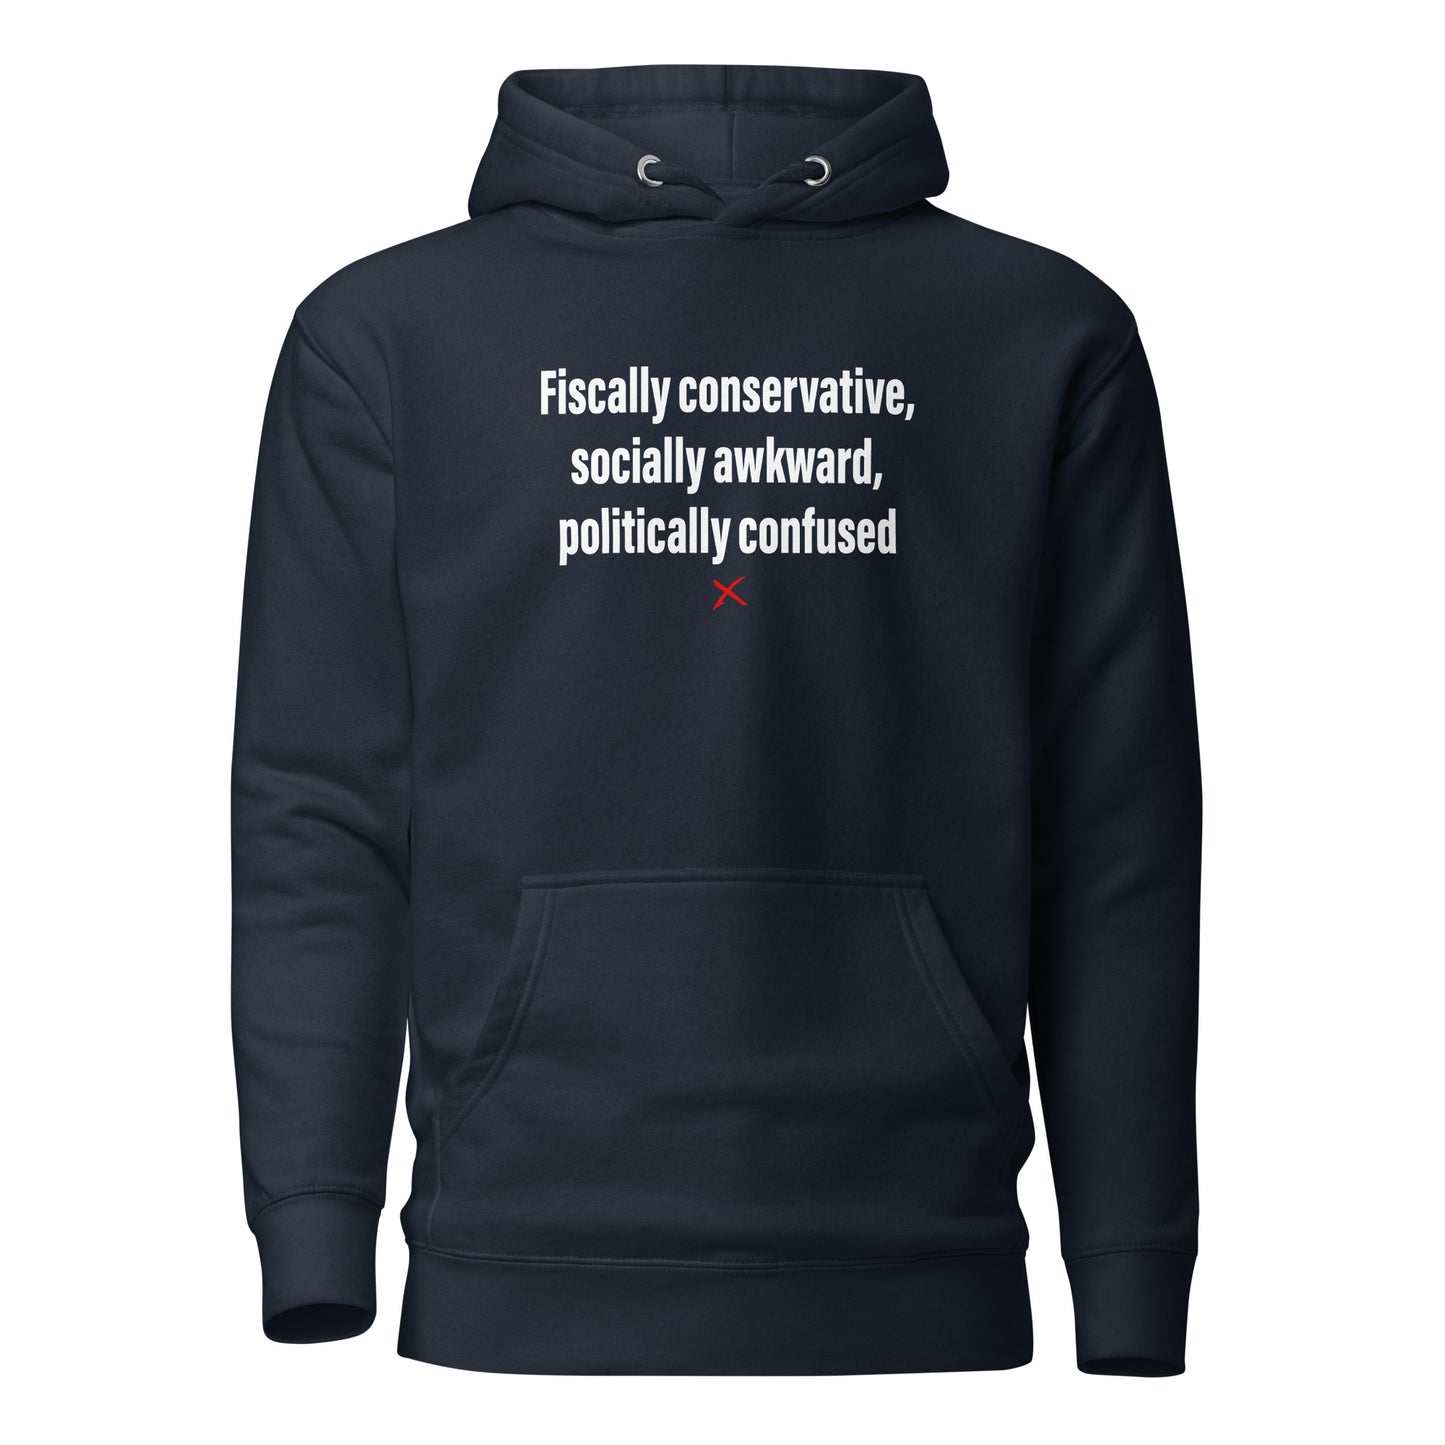 Fiscally conservative, socially awkward, politically confused - Hoodie